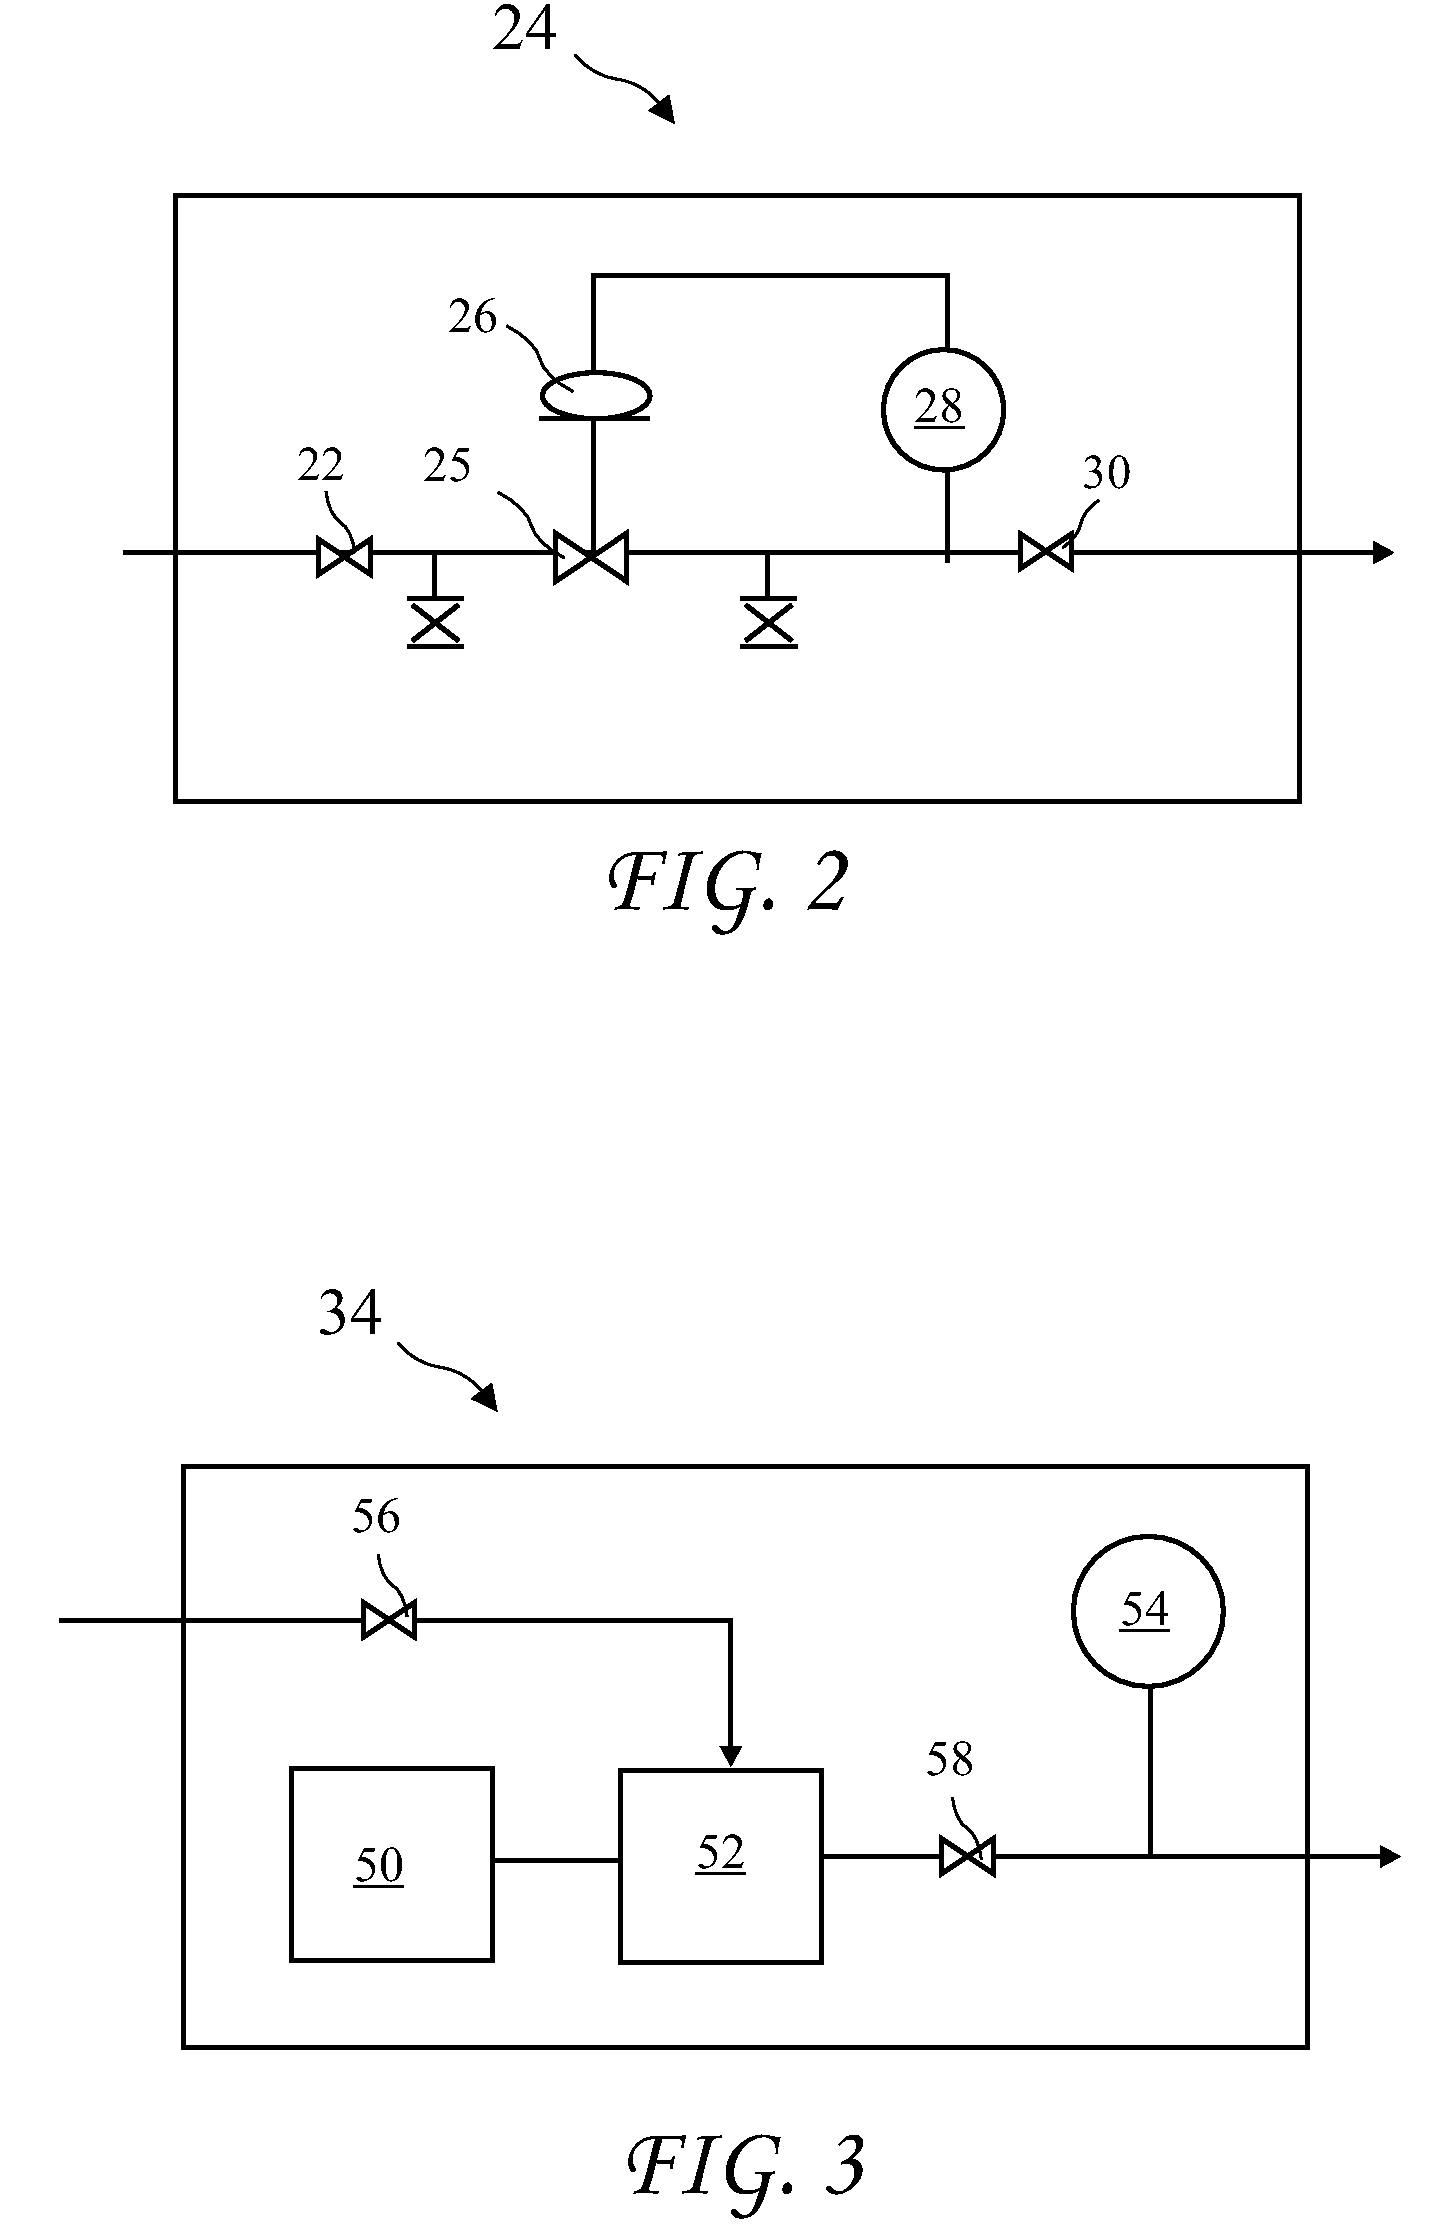 Apparatus and method for Rapid Biodiesel Fuel Production